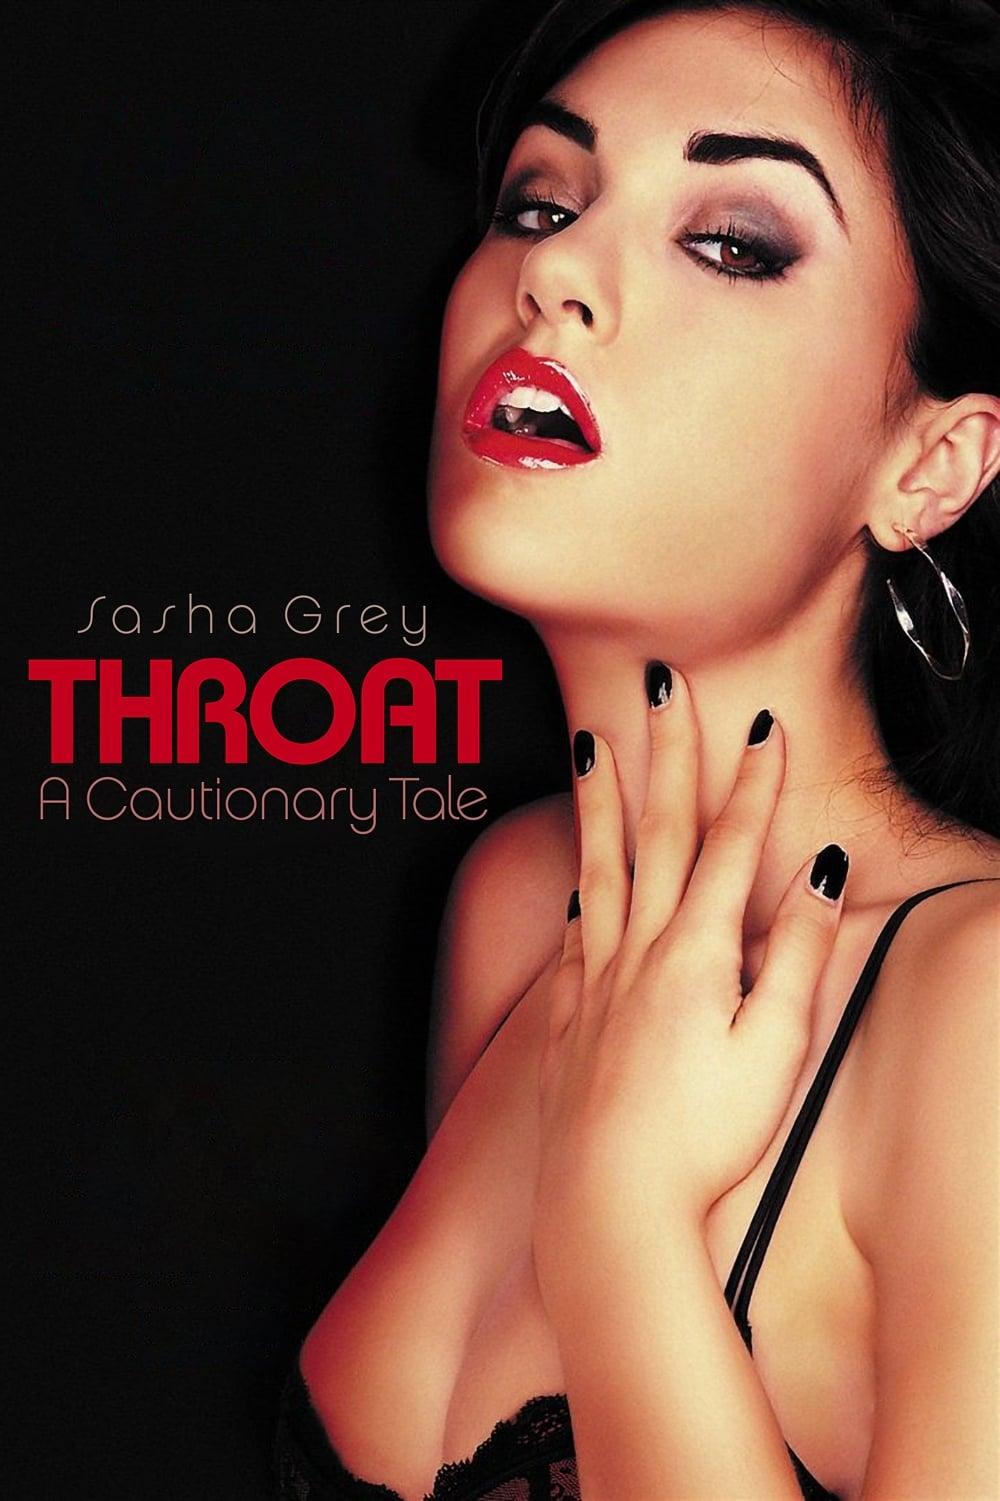 Throat: A Cautionary Tale poster